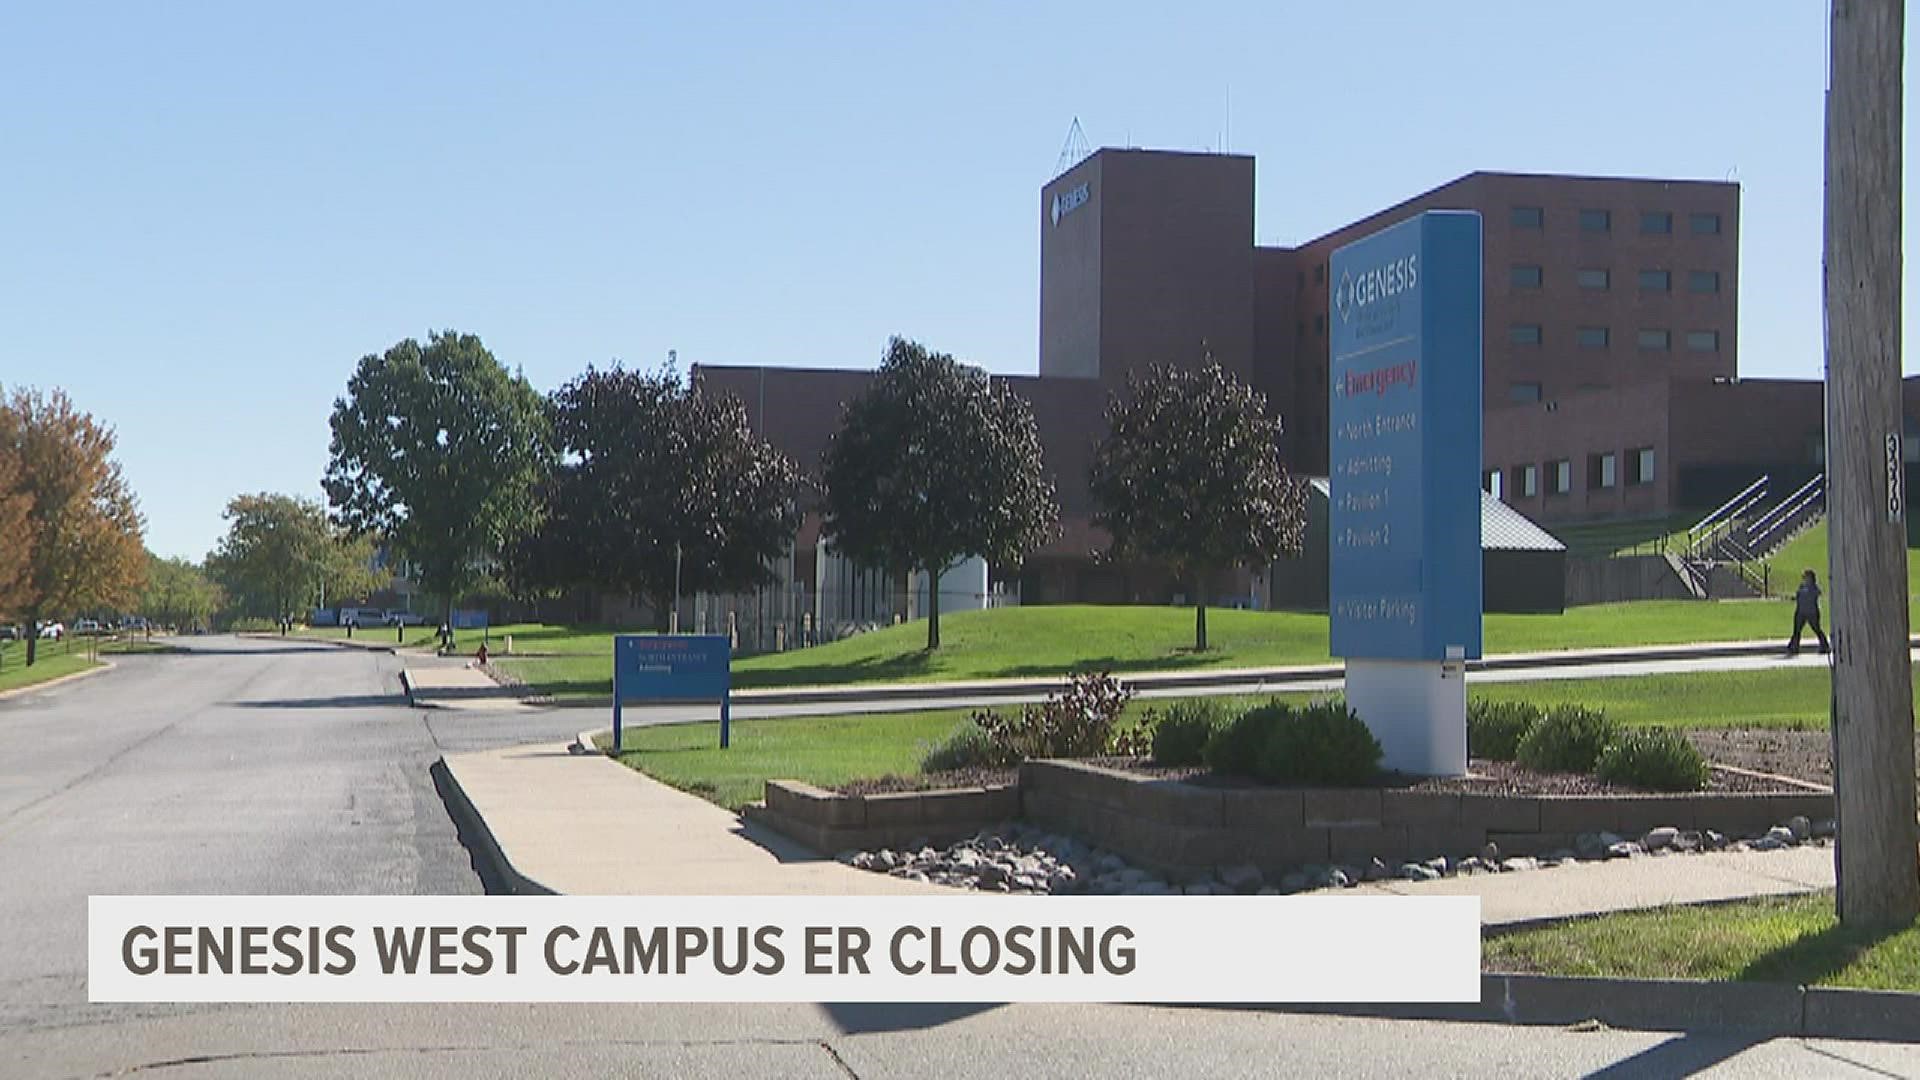 The Genesis Davenport West campus emergency department will close in December, with staff and resources moving to the East campus. The West campus remains open.